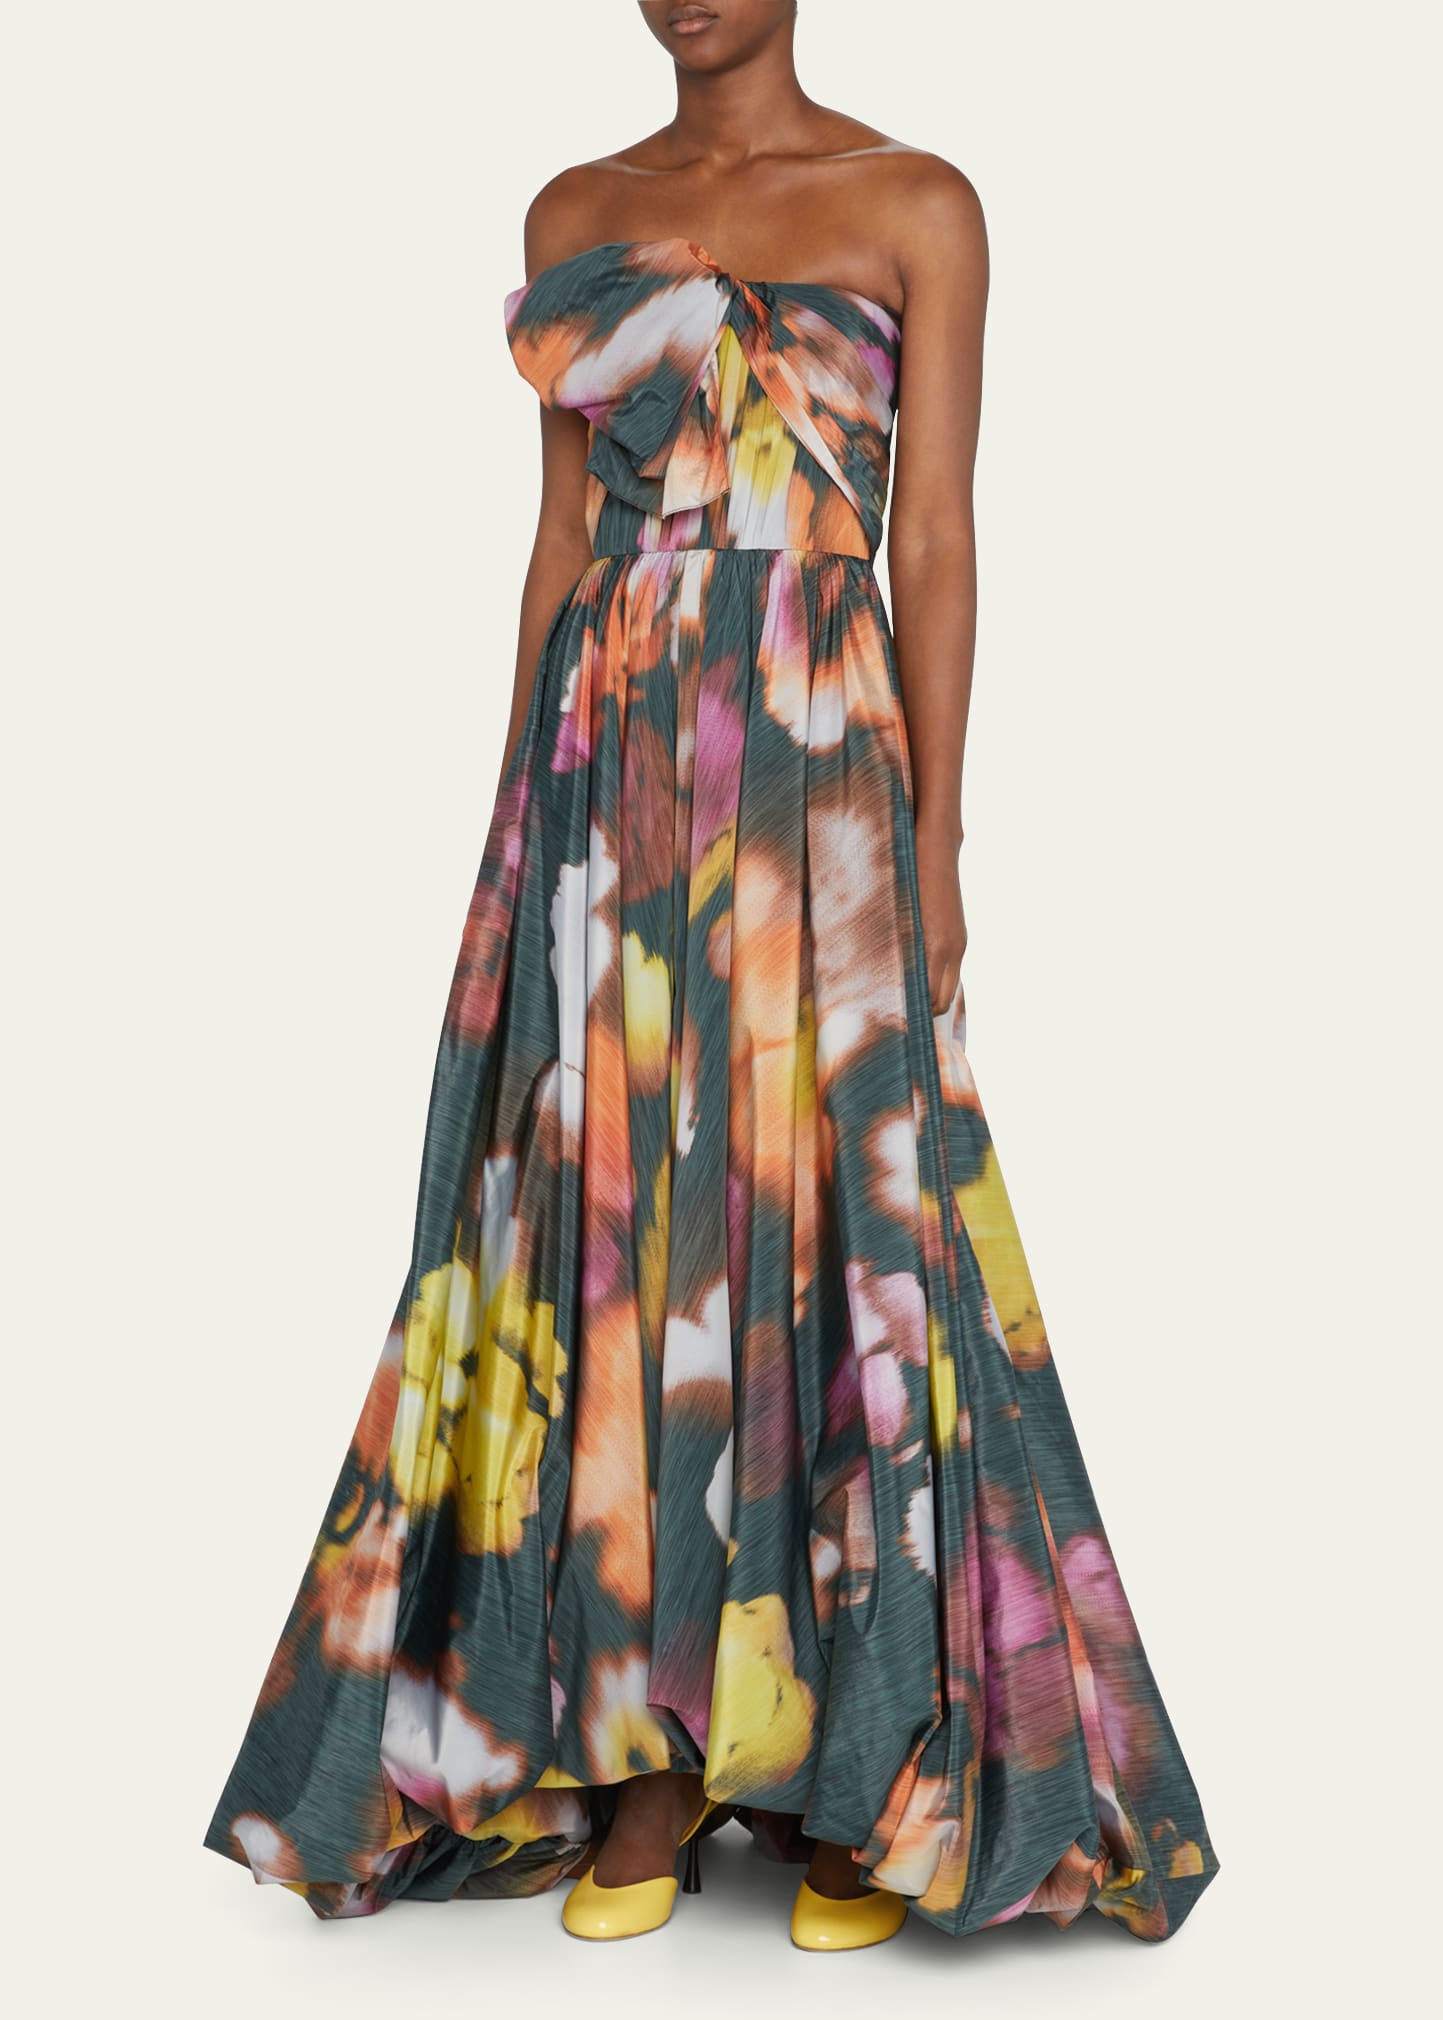 JASON WU COLLECTION IRIS FLORAL WARP-PRINT STRAPLESS HIGH-LOW GOWN